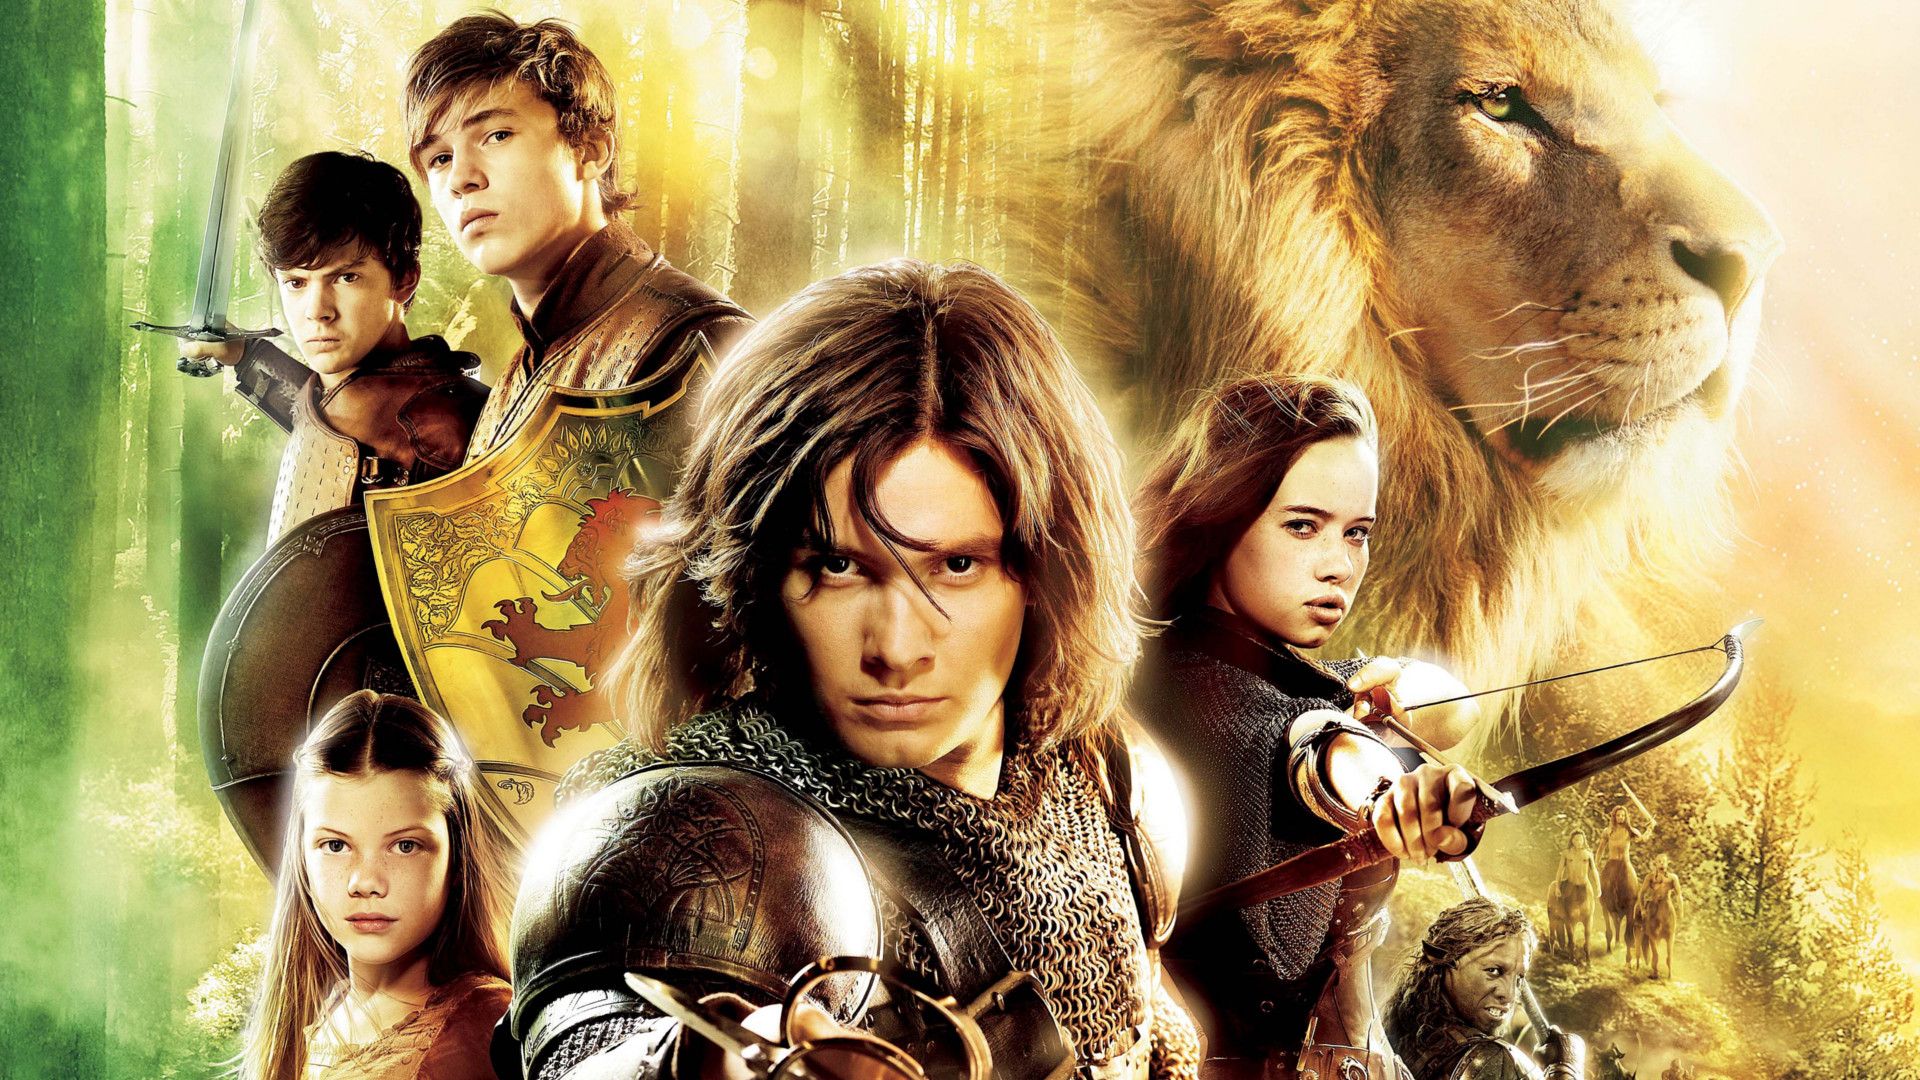 Movie The Chronicles Of Narnia Prince Caspian Wallpaper:1920x1080